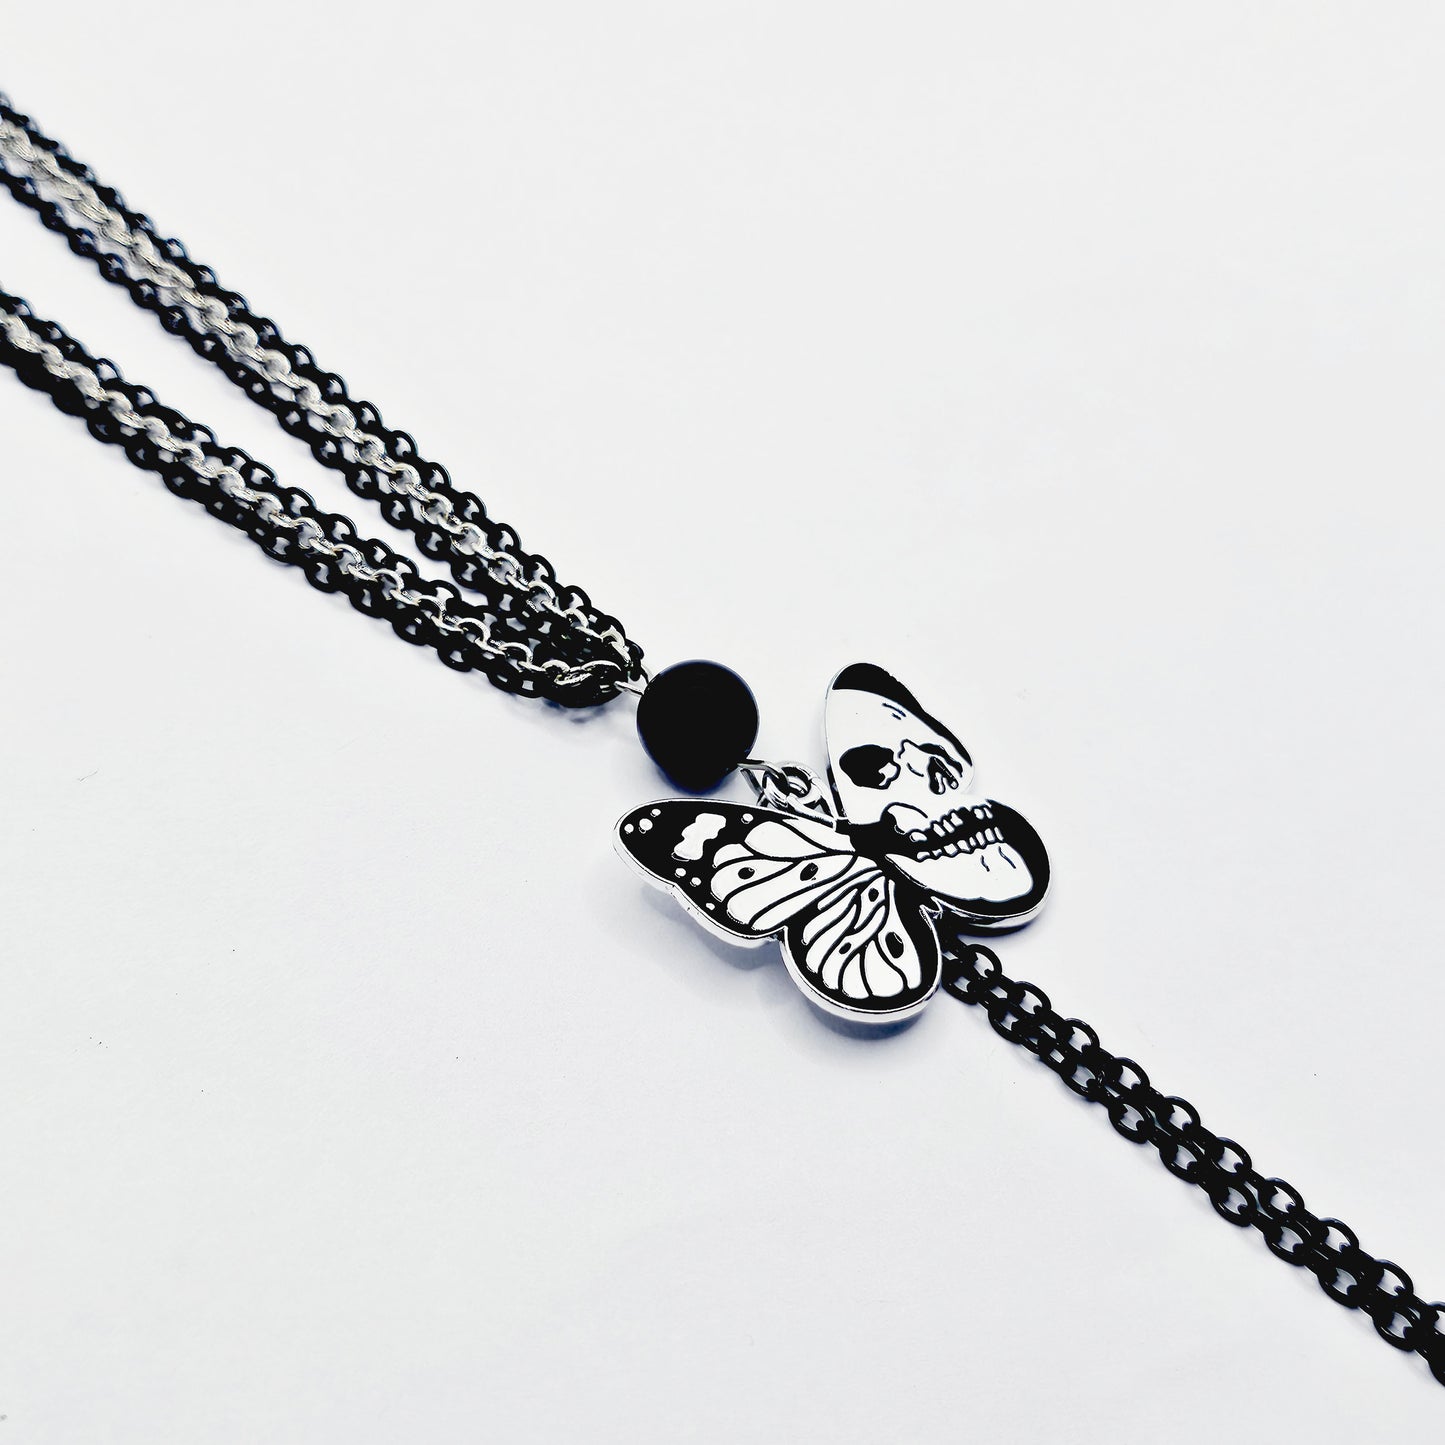 Nipple Chain Necklace, Black and Silver with Skull Butterflies.  Non Piercing Nipple Nooses or Nipple Clamps.